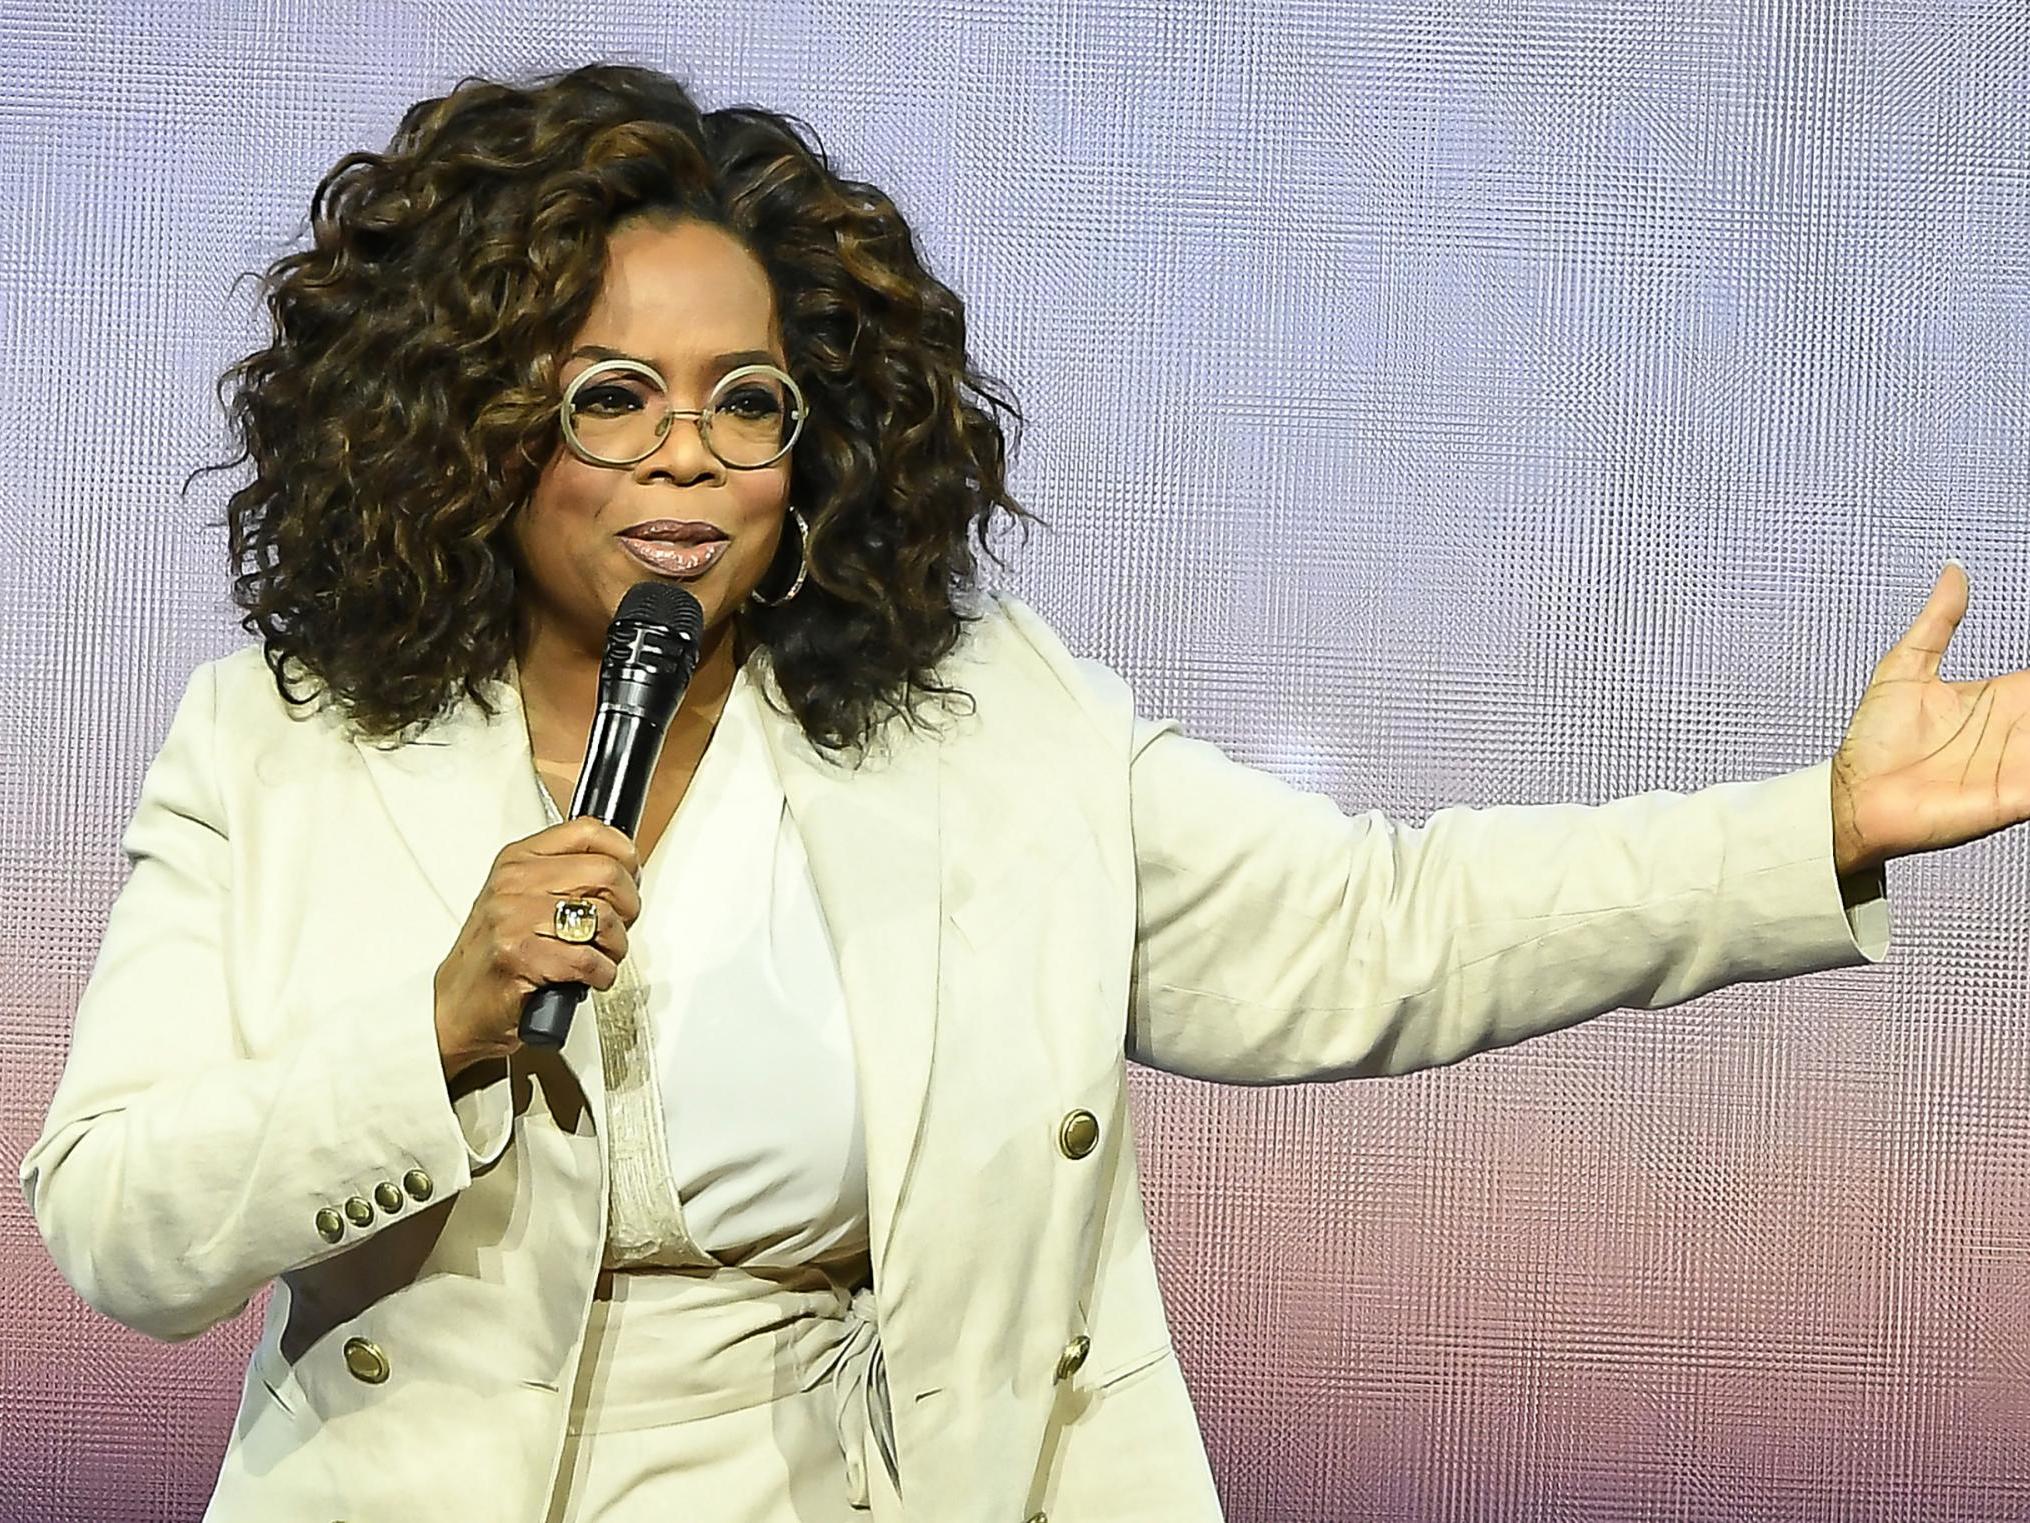 Oprah Winfrey says US is at 'true tipping point' over systemic racism